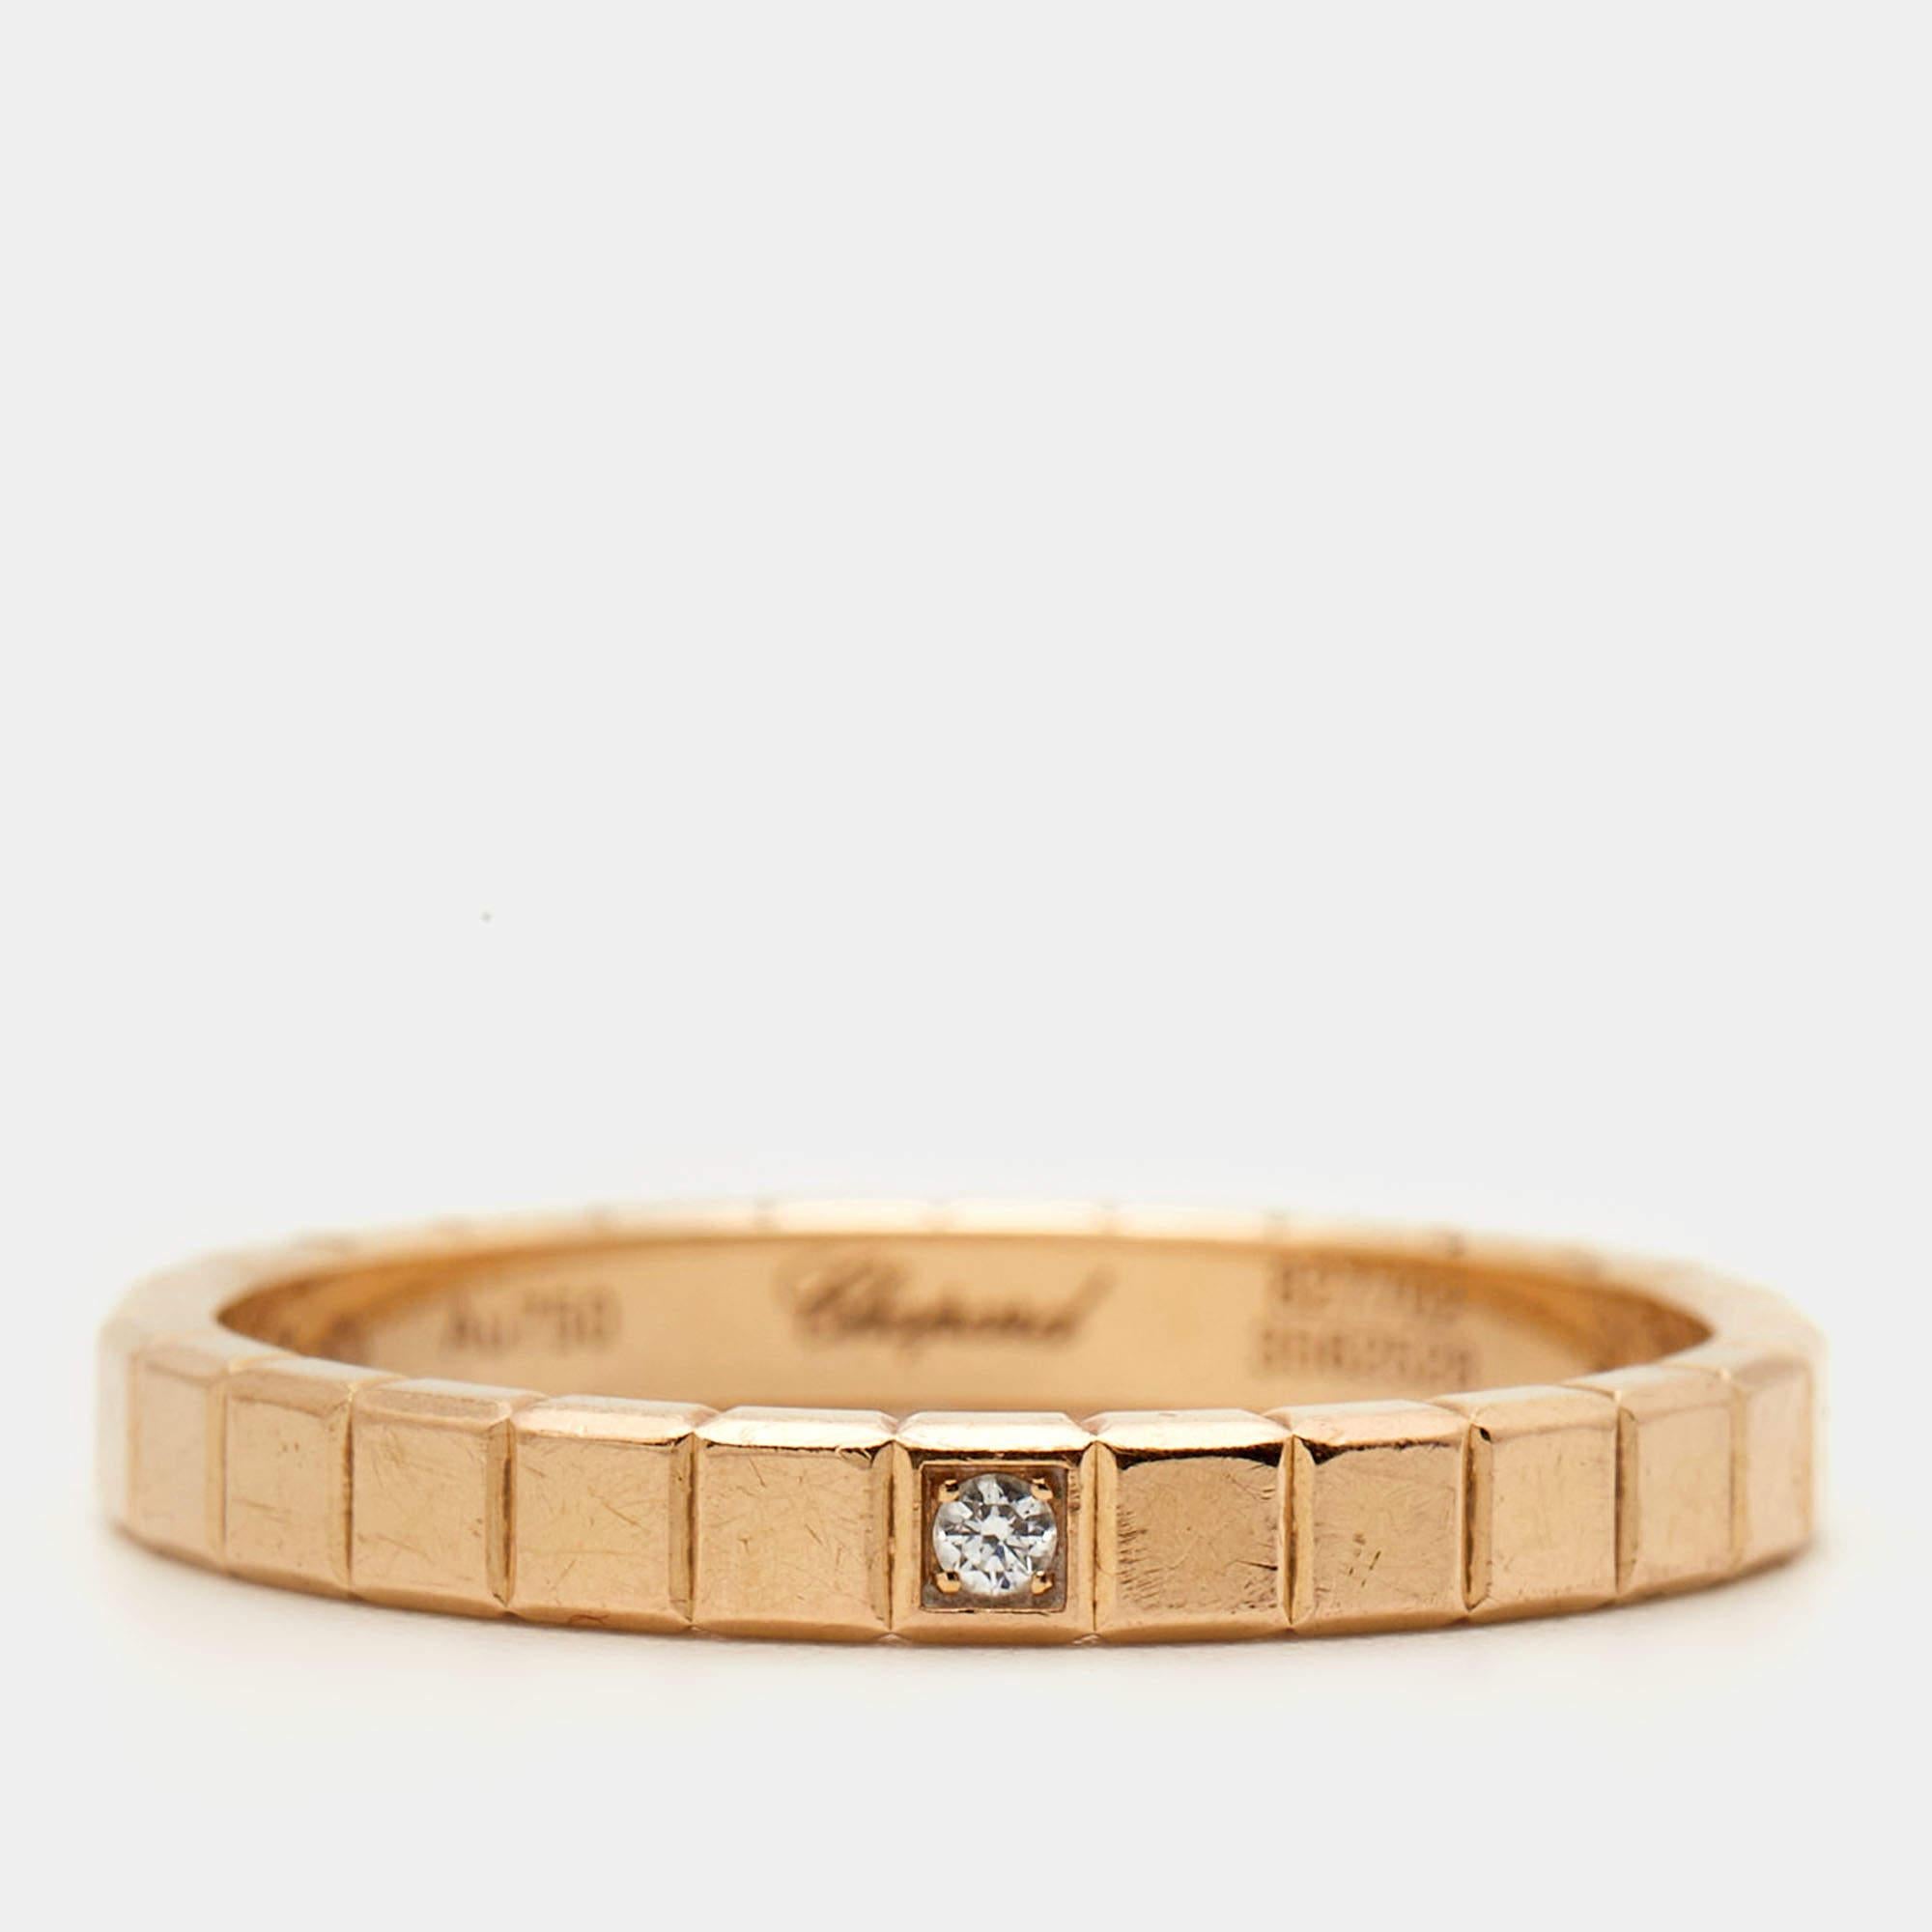 This Chopard ring is impeccably sculpted from 18k rose gold with textures mimicking ice cubes and is highlighted by a single diamond. The intricate geometrical cube shapes are arranged in harmony, making this piece a stunner.

Includes: Original